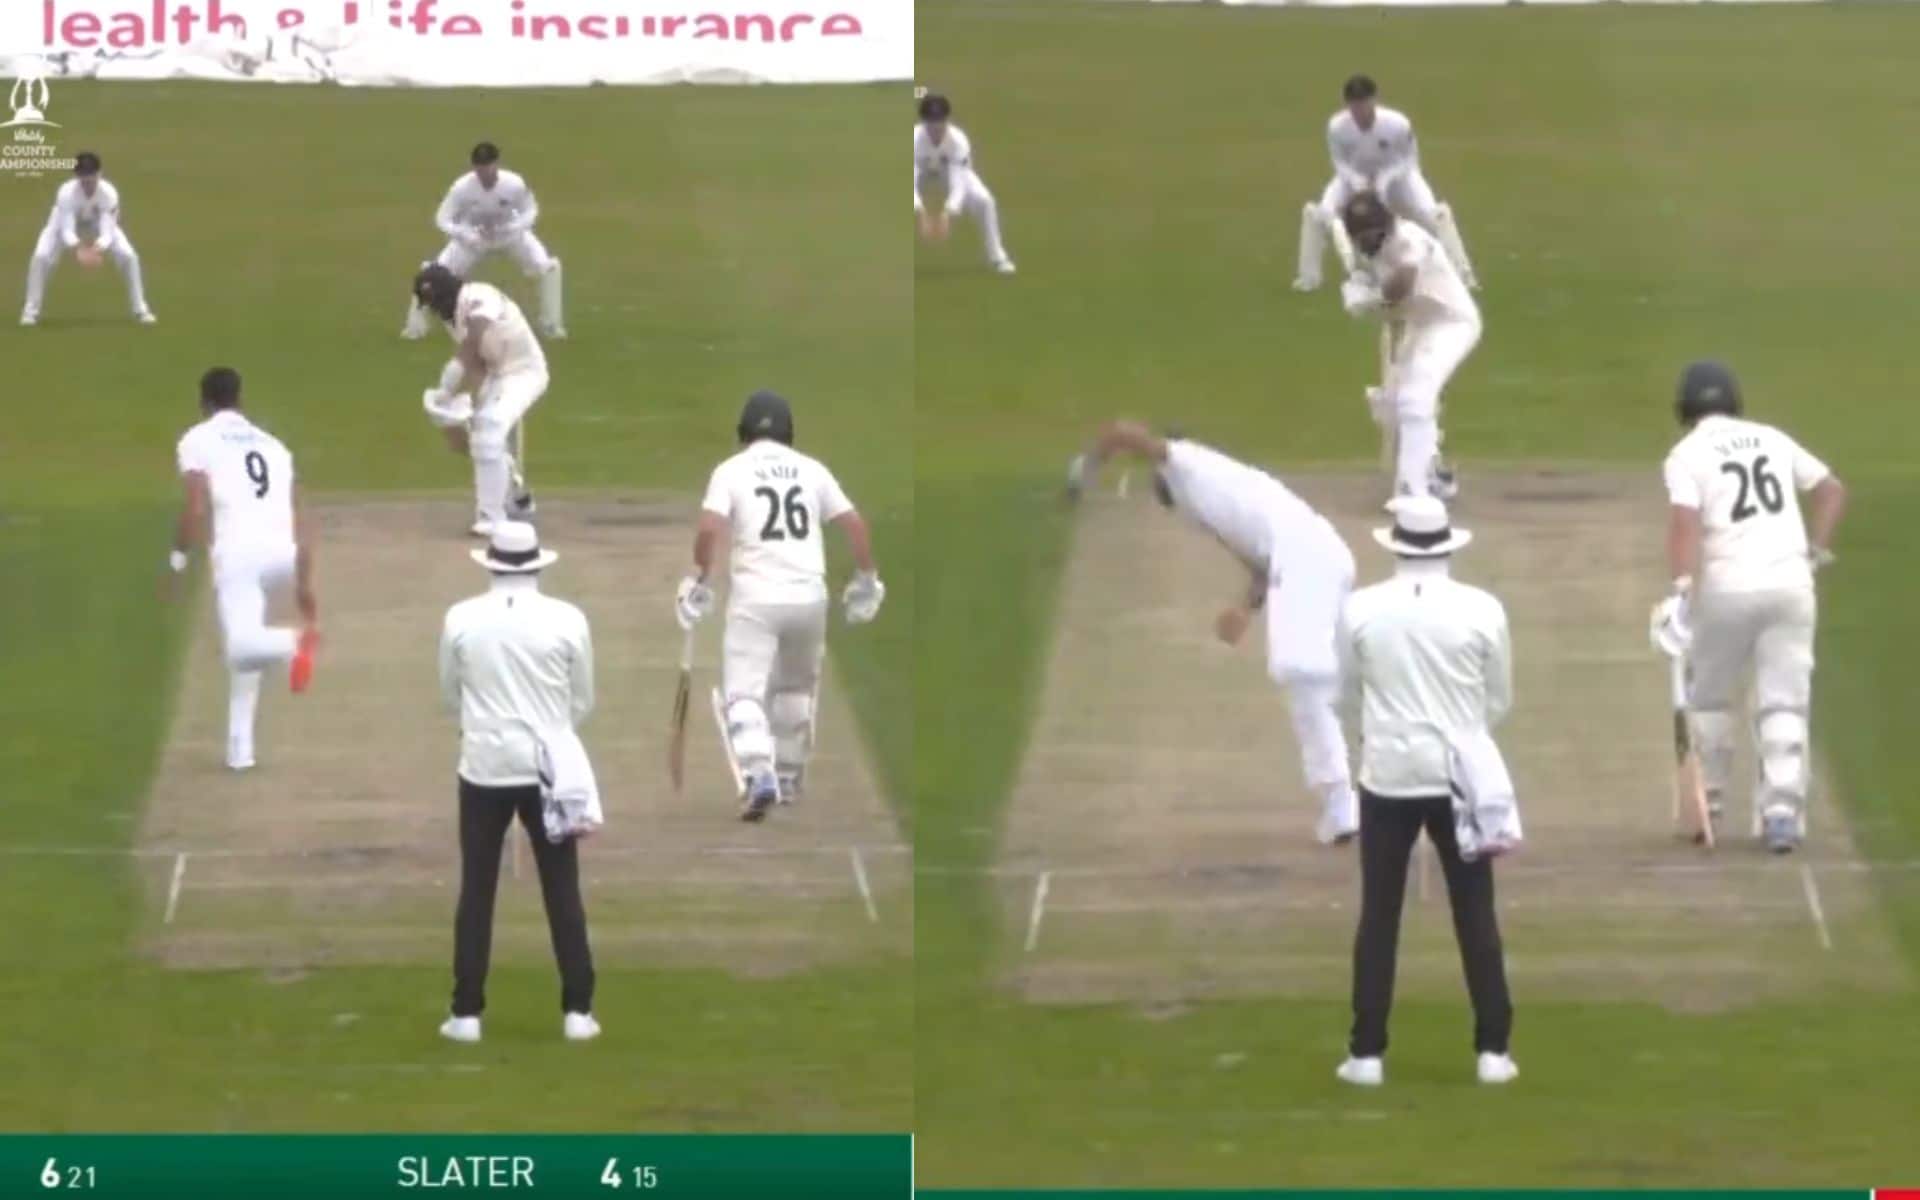 Jimmy Anderson scalped the wicket of Haseeb Hameed (x)